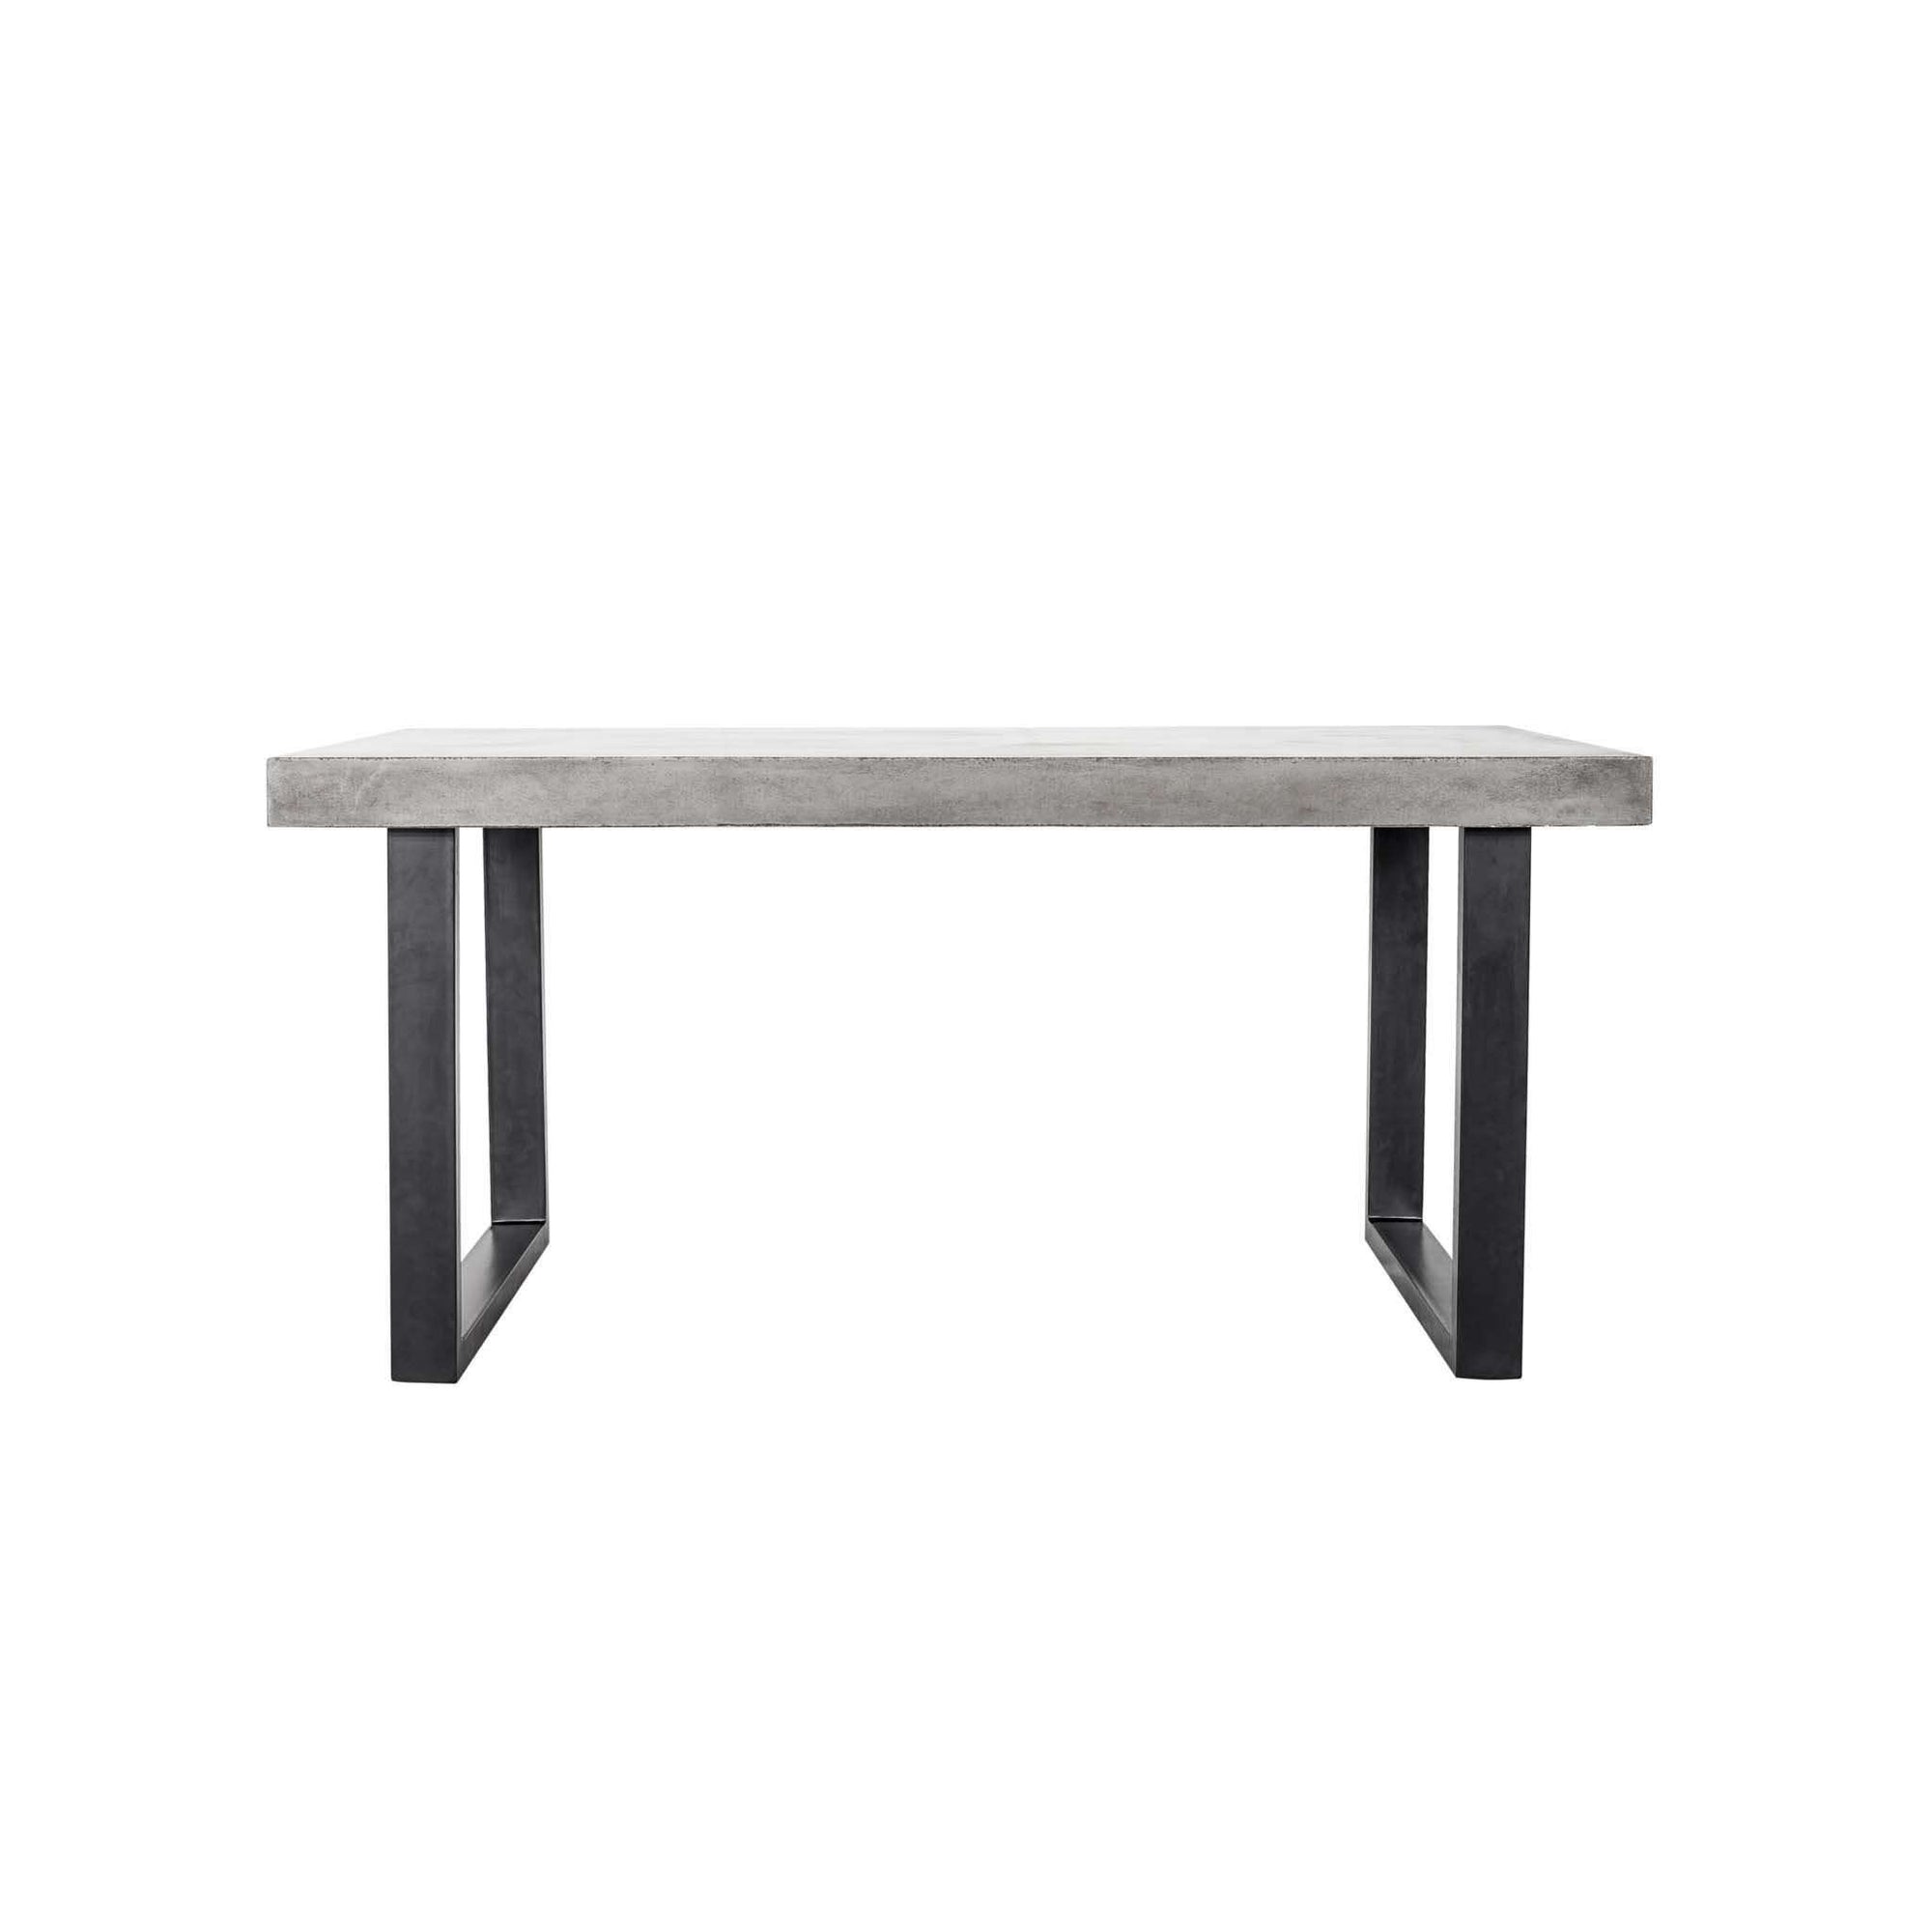 MOES-JEDRIK OUTDOOR DINING TABLE LARGE-Outdoor Dining Tables-MODTEMPO